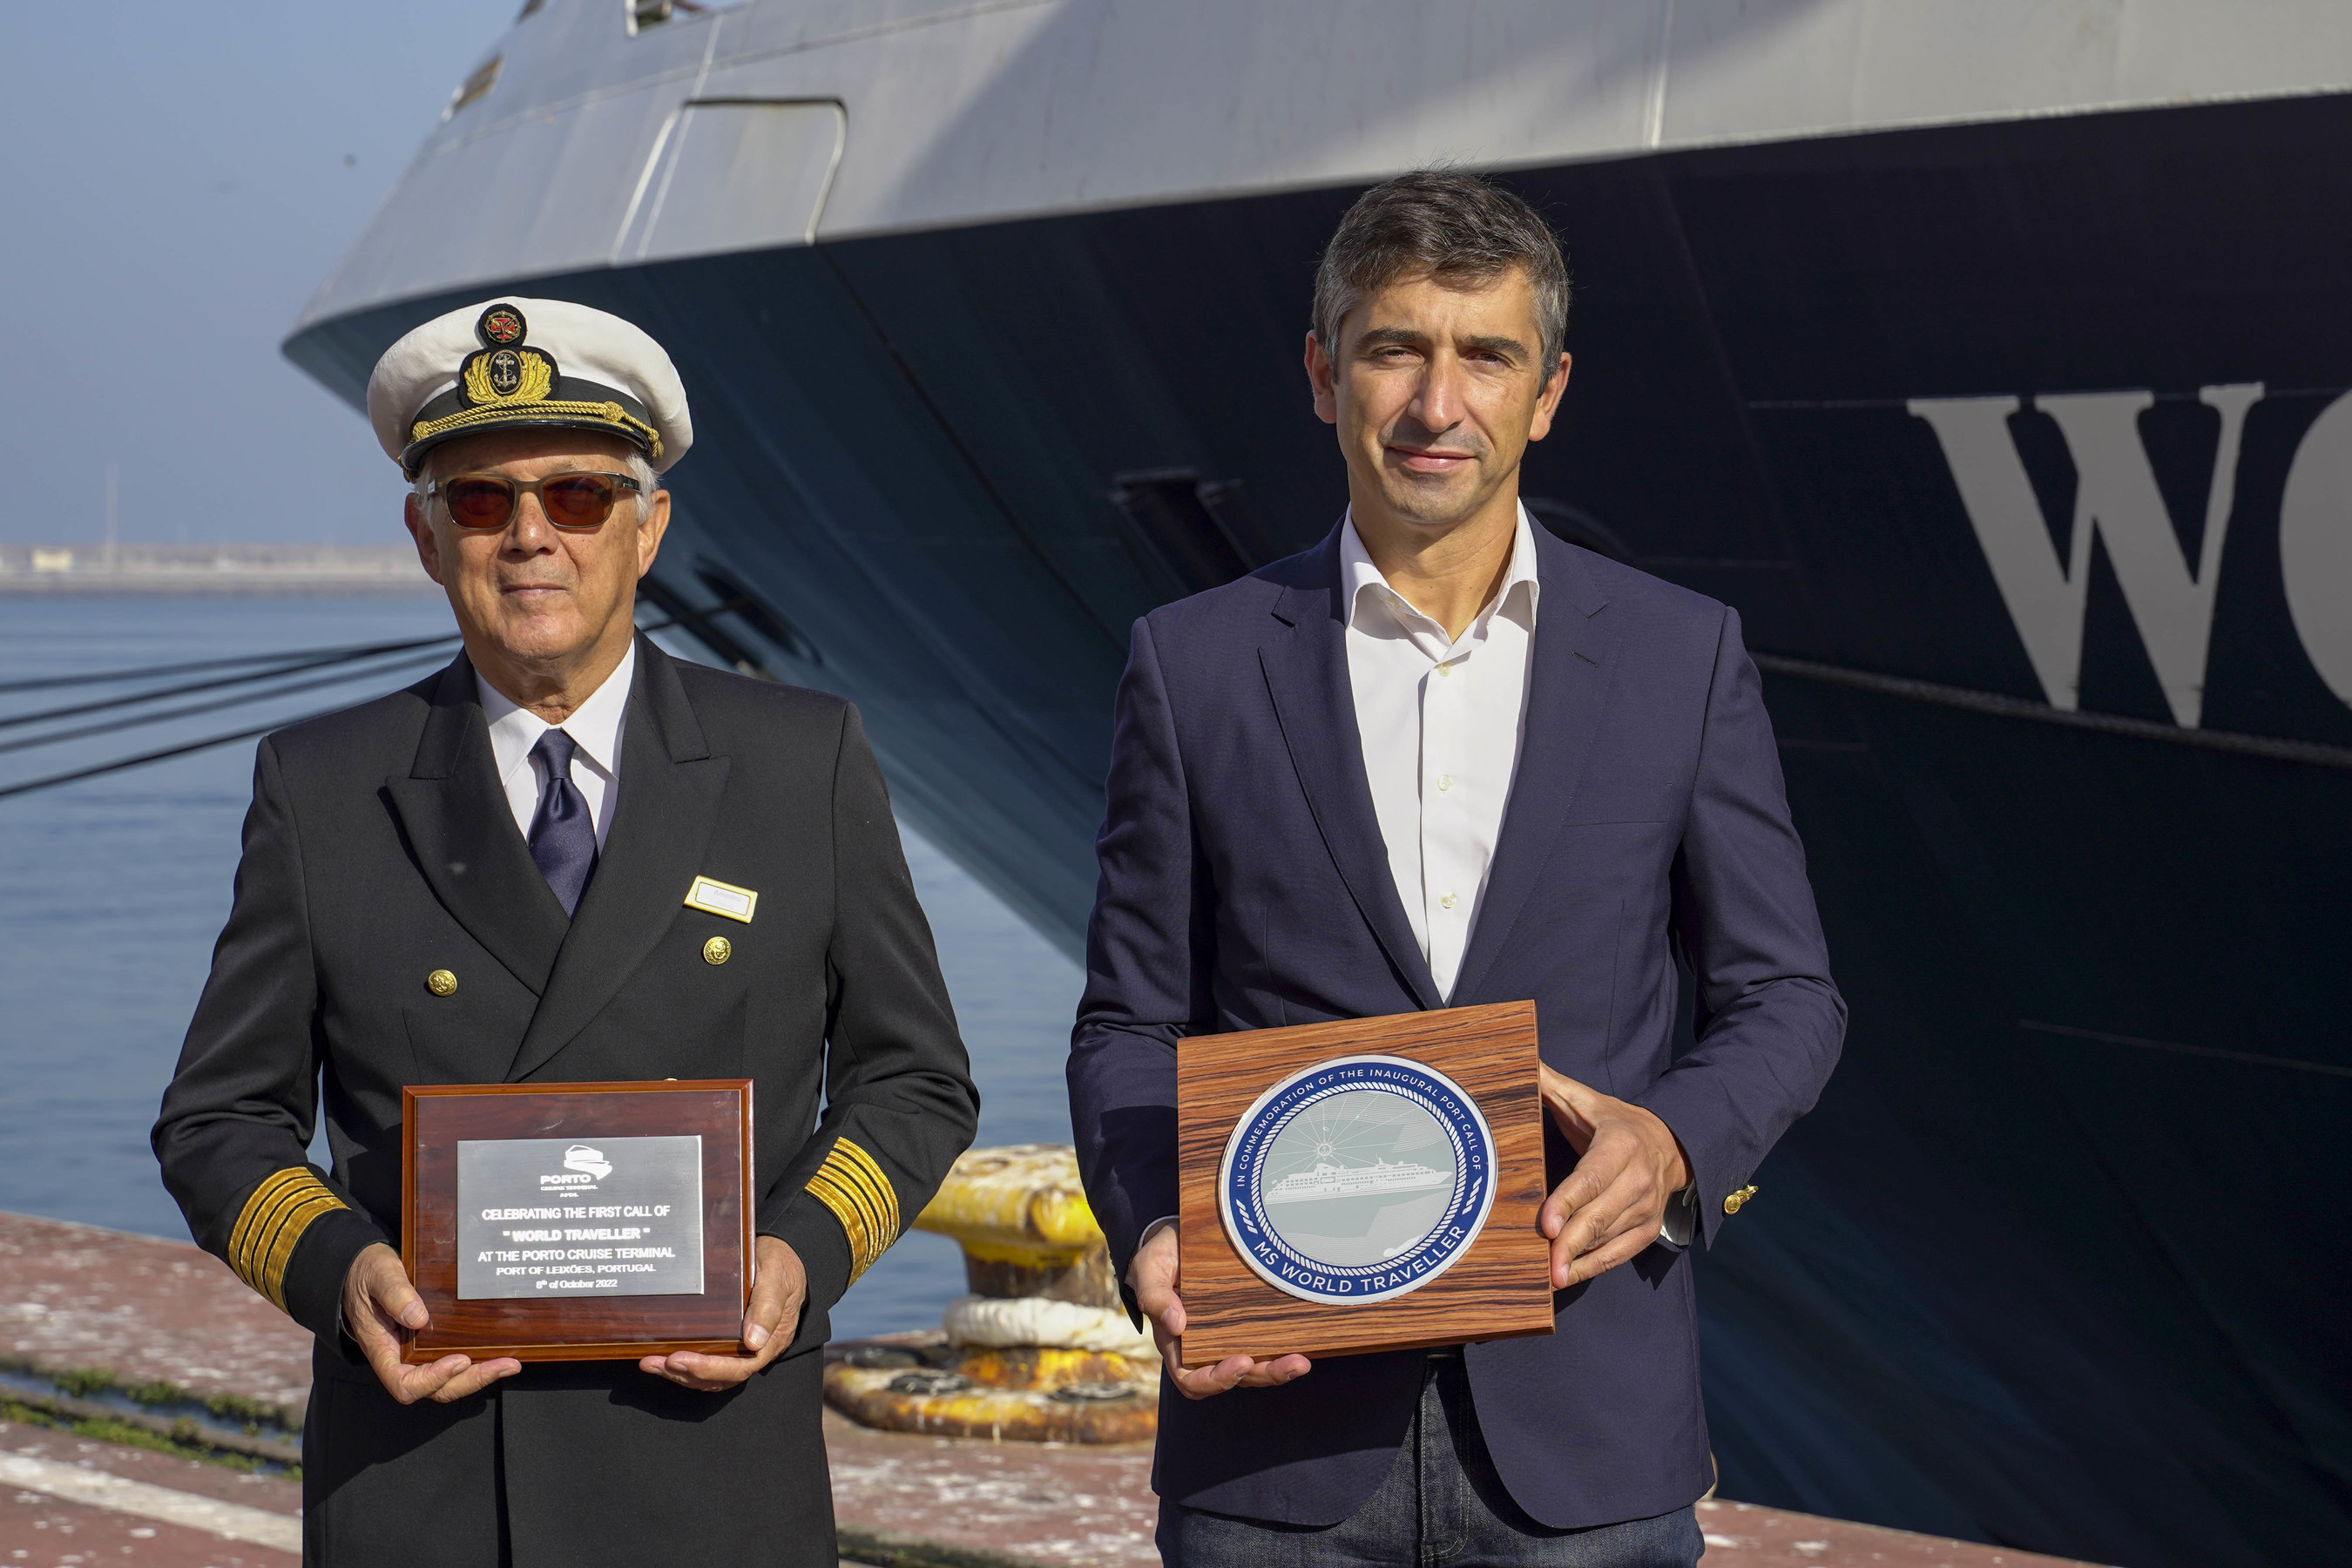 Atlas Ocean Voyages’ new 200-guest World Traveller was warmly welcomed to the Port of Leixões, Portugal, where the ship was showcased to international travel partners and media. Pictured here is Nuno Araújo, chairman of the Board of Directors, Leixões Port Authority, and Captain Amadeu Albuquerque, head of Fleet Operations for Mystic Invest, Atlas’ parent company  (Image at LateCruiseNews.com - October 2022)